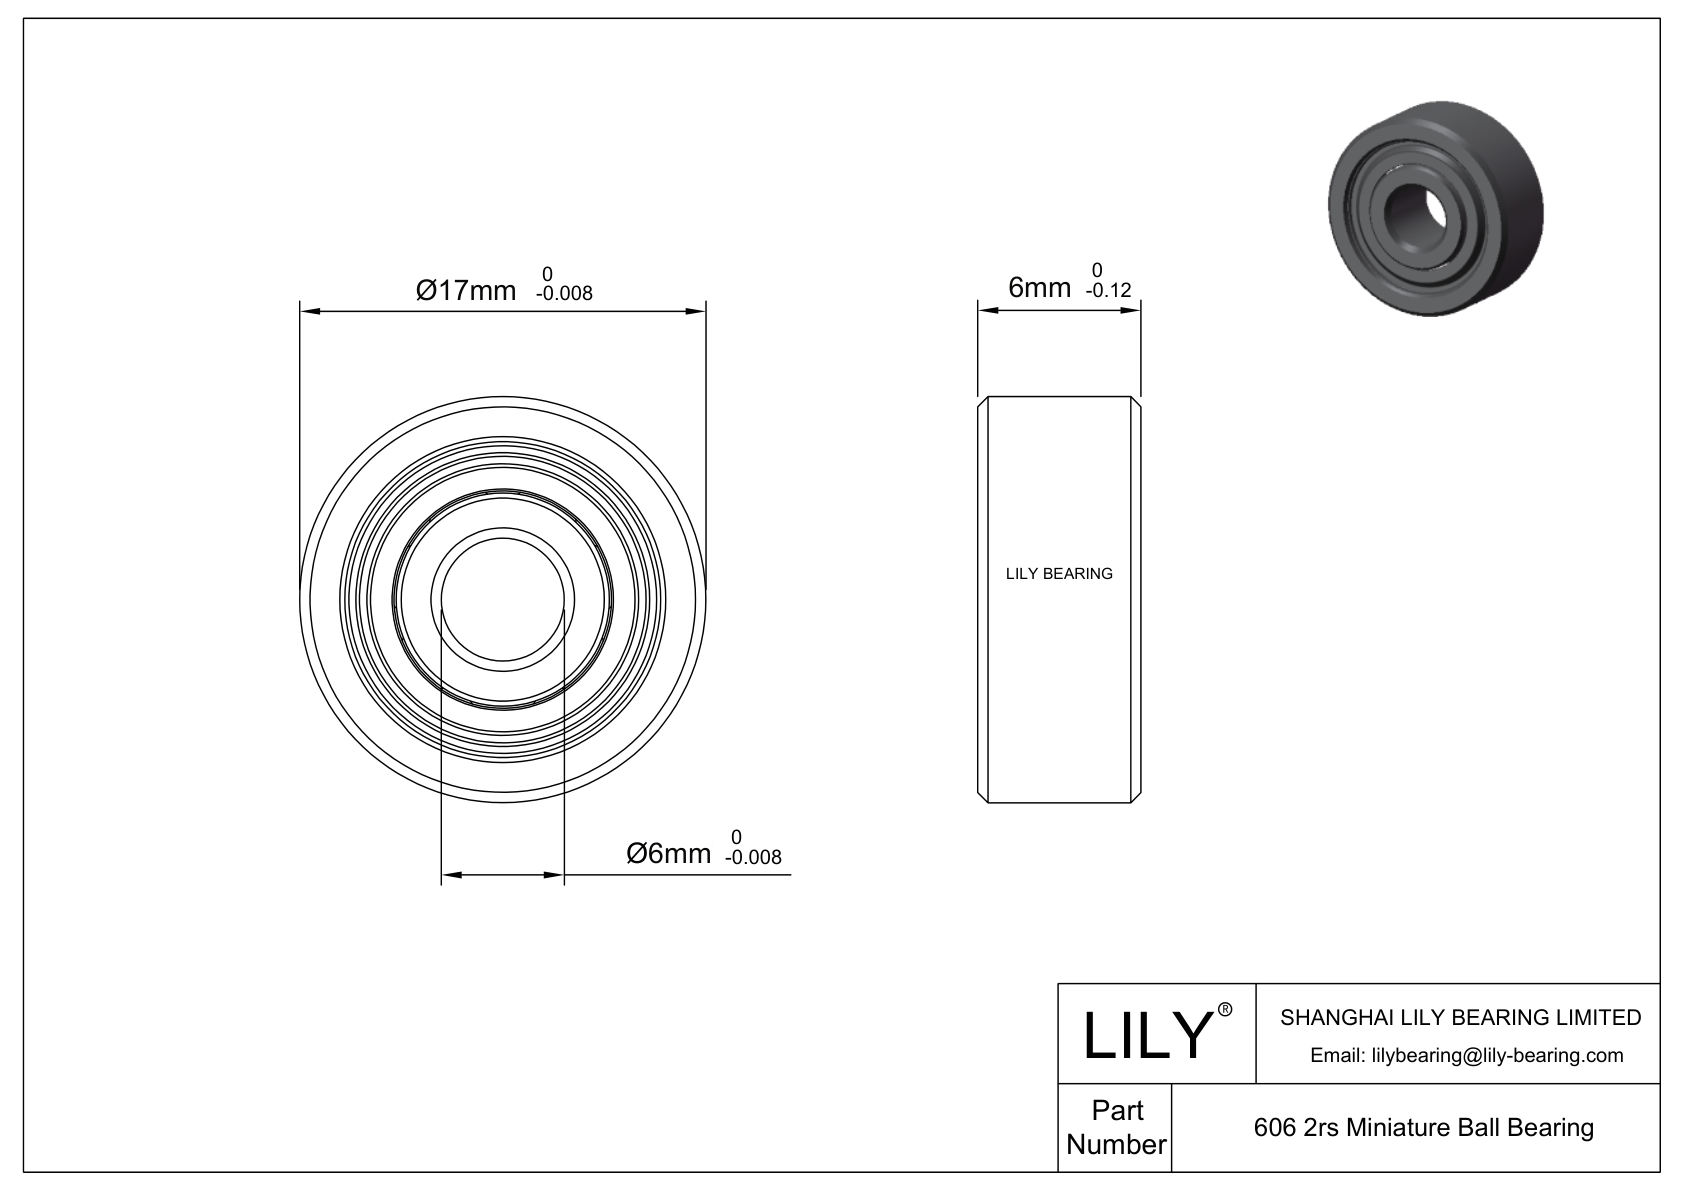 LILY-BS60624-6 POM Coated Bearing cad drawing